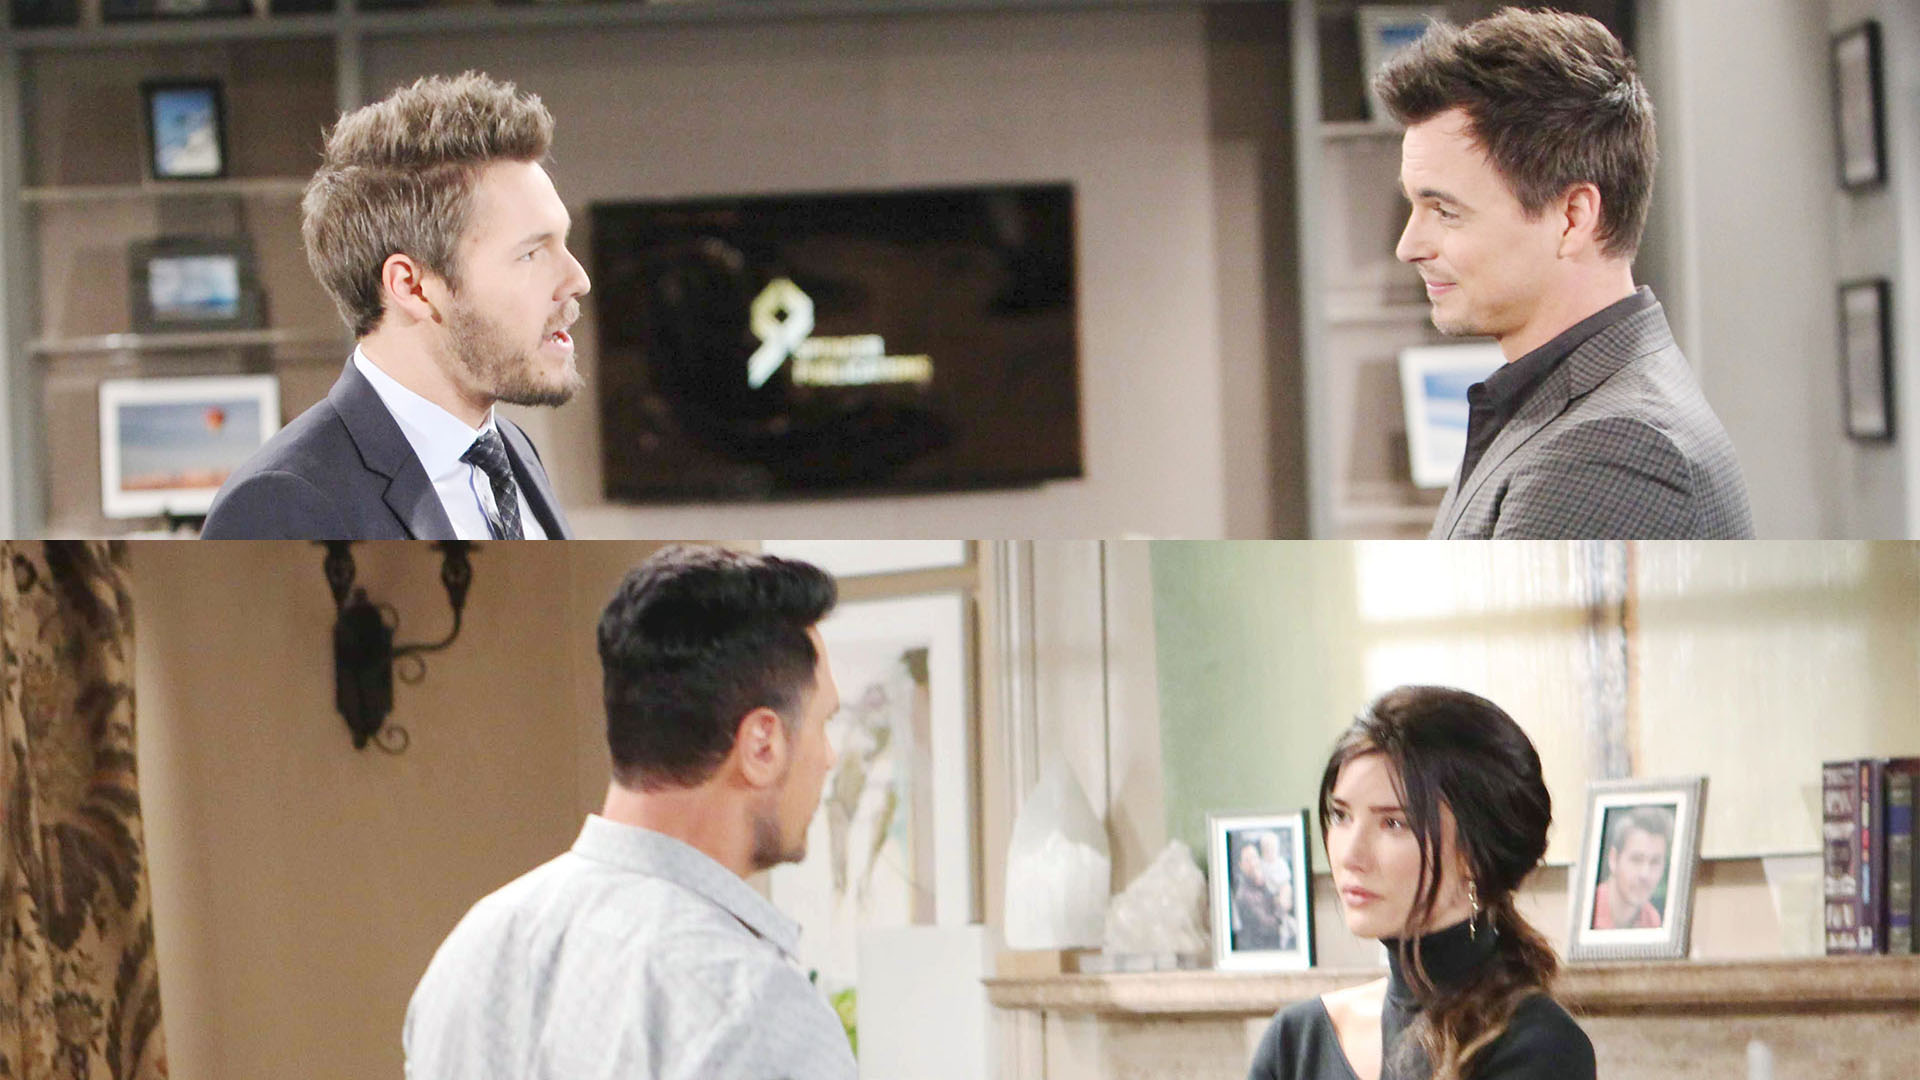 Liam shares his happy news with Wyatt, while Steffy shares her not-so-happy news with Bill.